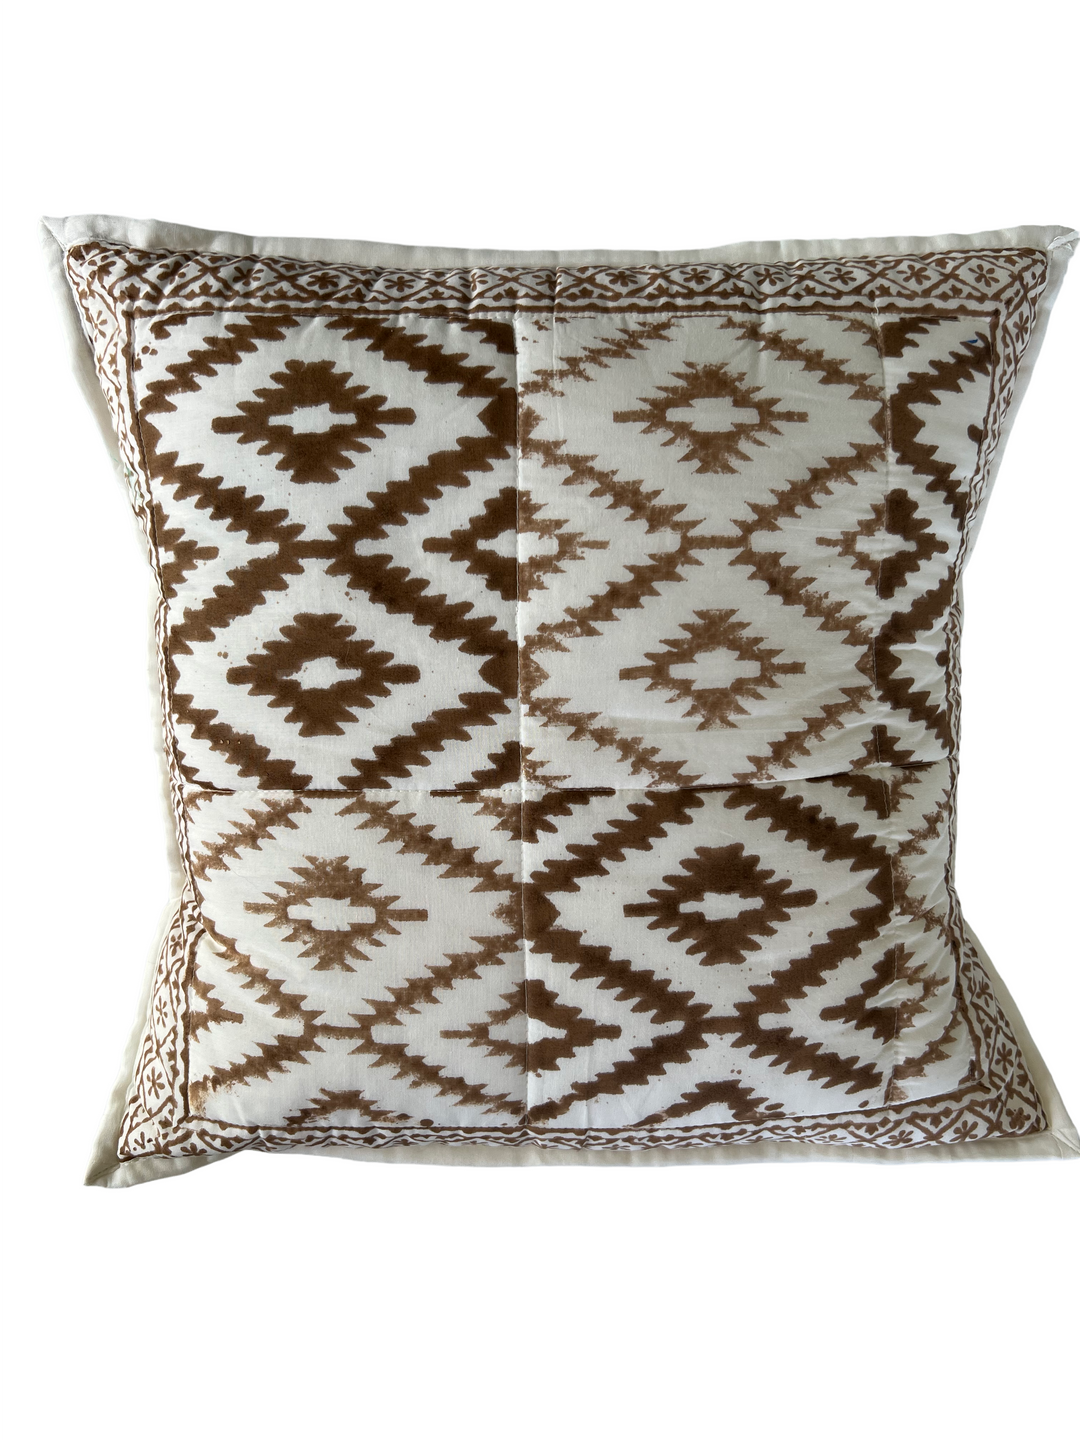 Urth - 16" square quilted pillow cover